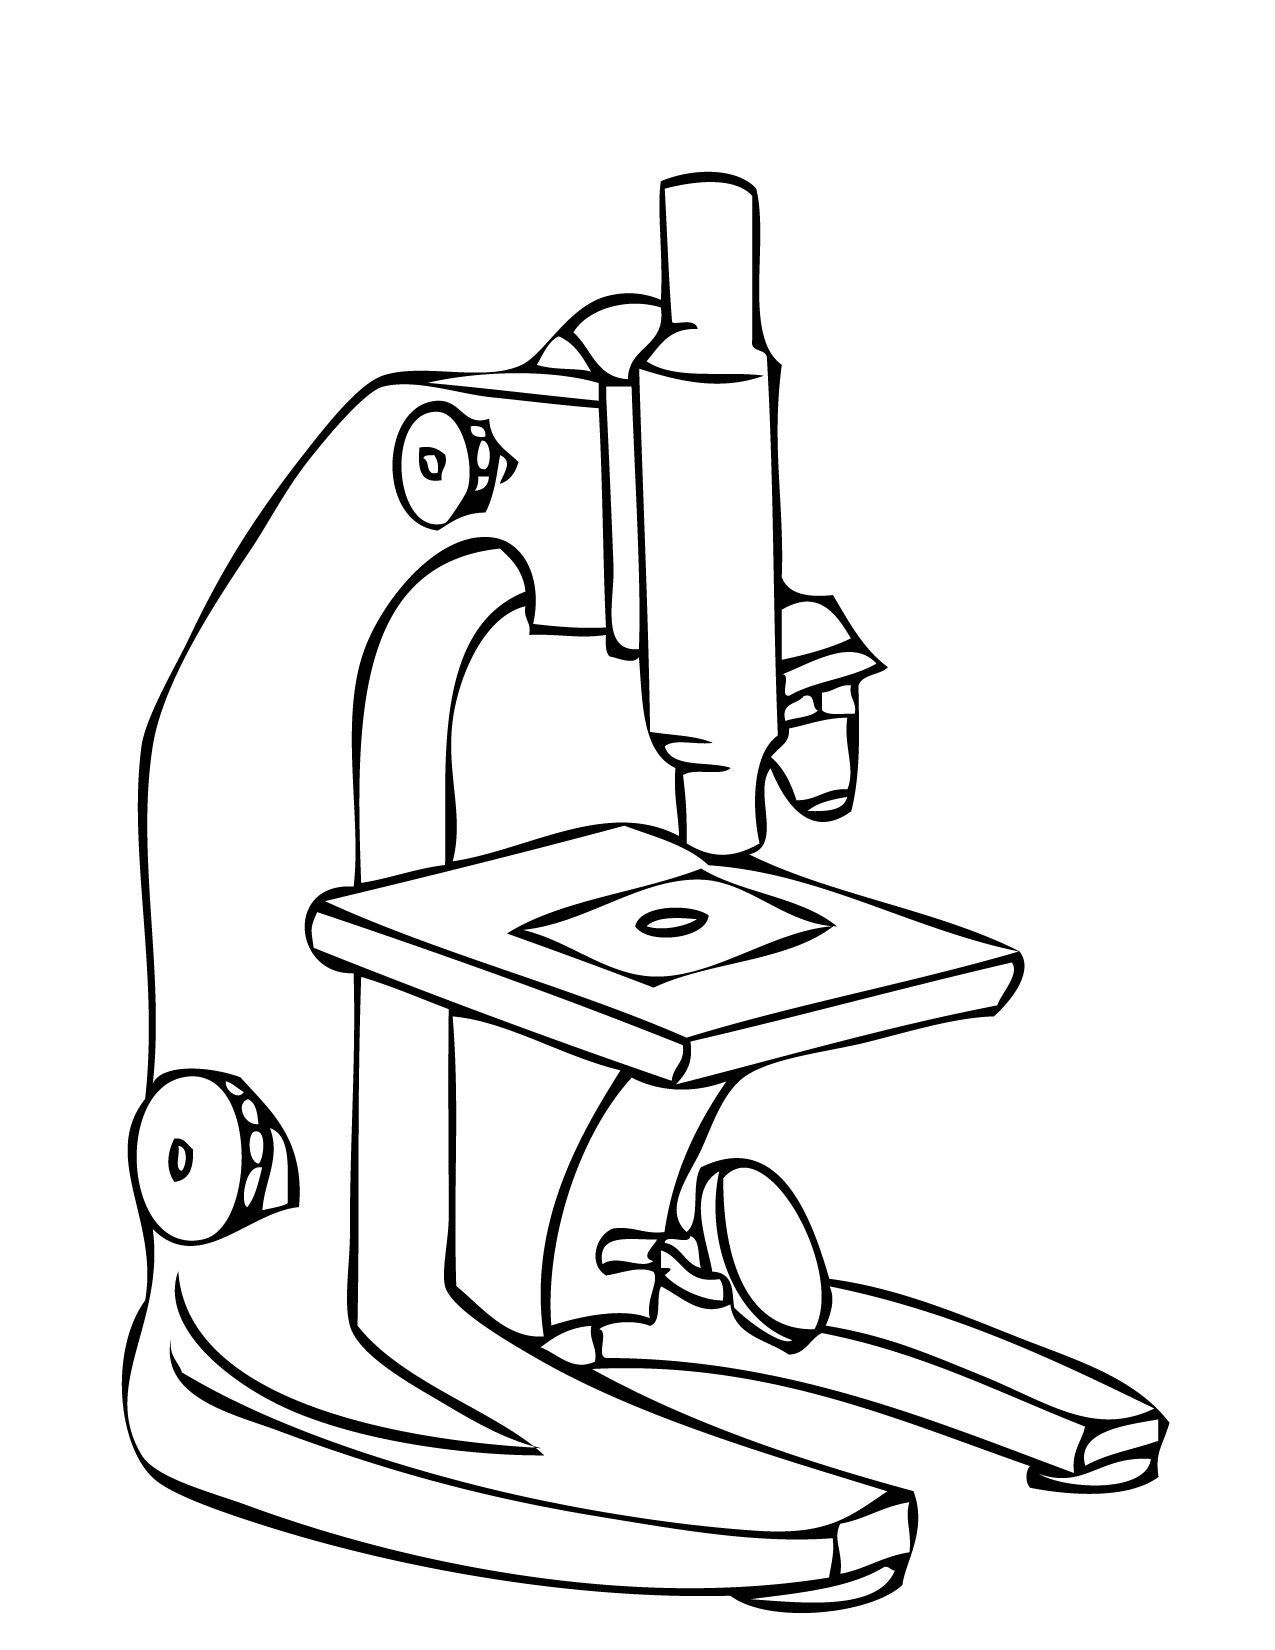 SOLVED: Parts of the Microscope Week Parts of the Microscope Name the Parts  of the Microscope labeled in the drawing